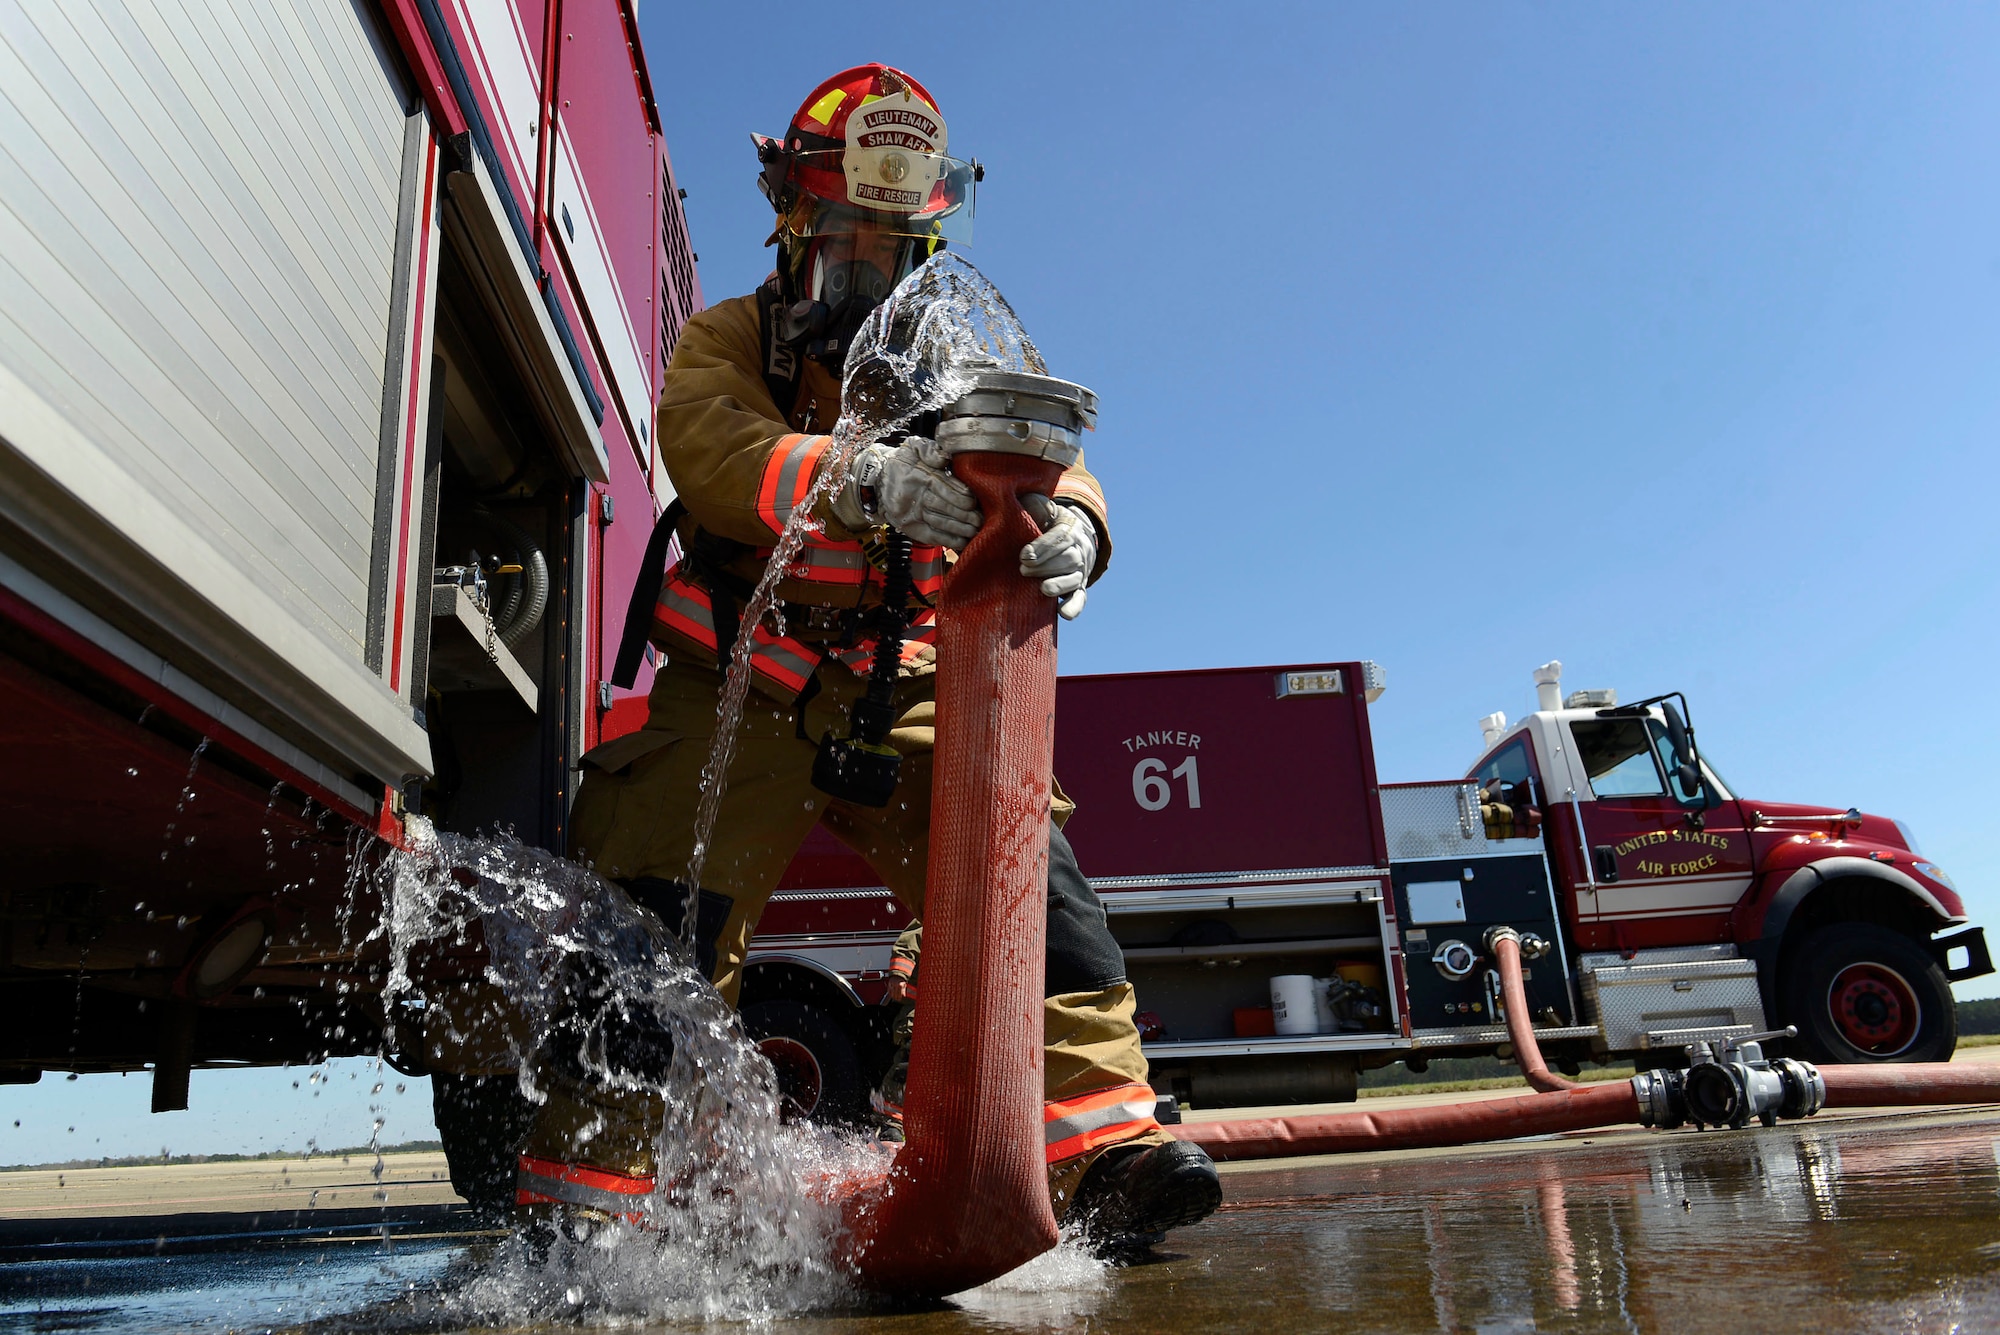 U.S. Air Force Staff Sgt. Larry Diaz, 20th Civil Engineer Squadron fire protection craftsman, removes a hose from a vehicle being supplied water from Tanker 61 during pilot ejection training at Shaw Air Force Base, S.C., March 15, 2016. Upon completion of training, hoses were disconnected and rolled back into their proper vehicles. (U.S. Air Force photo by Airman 1st Class Christopher Maldonado)